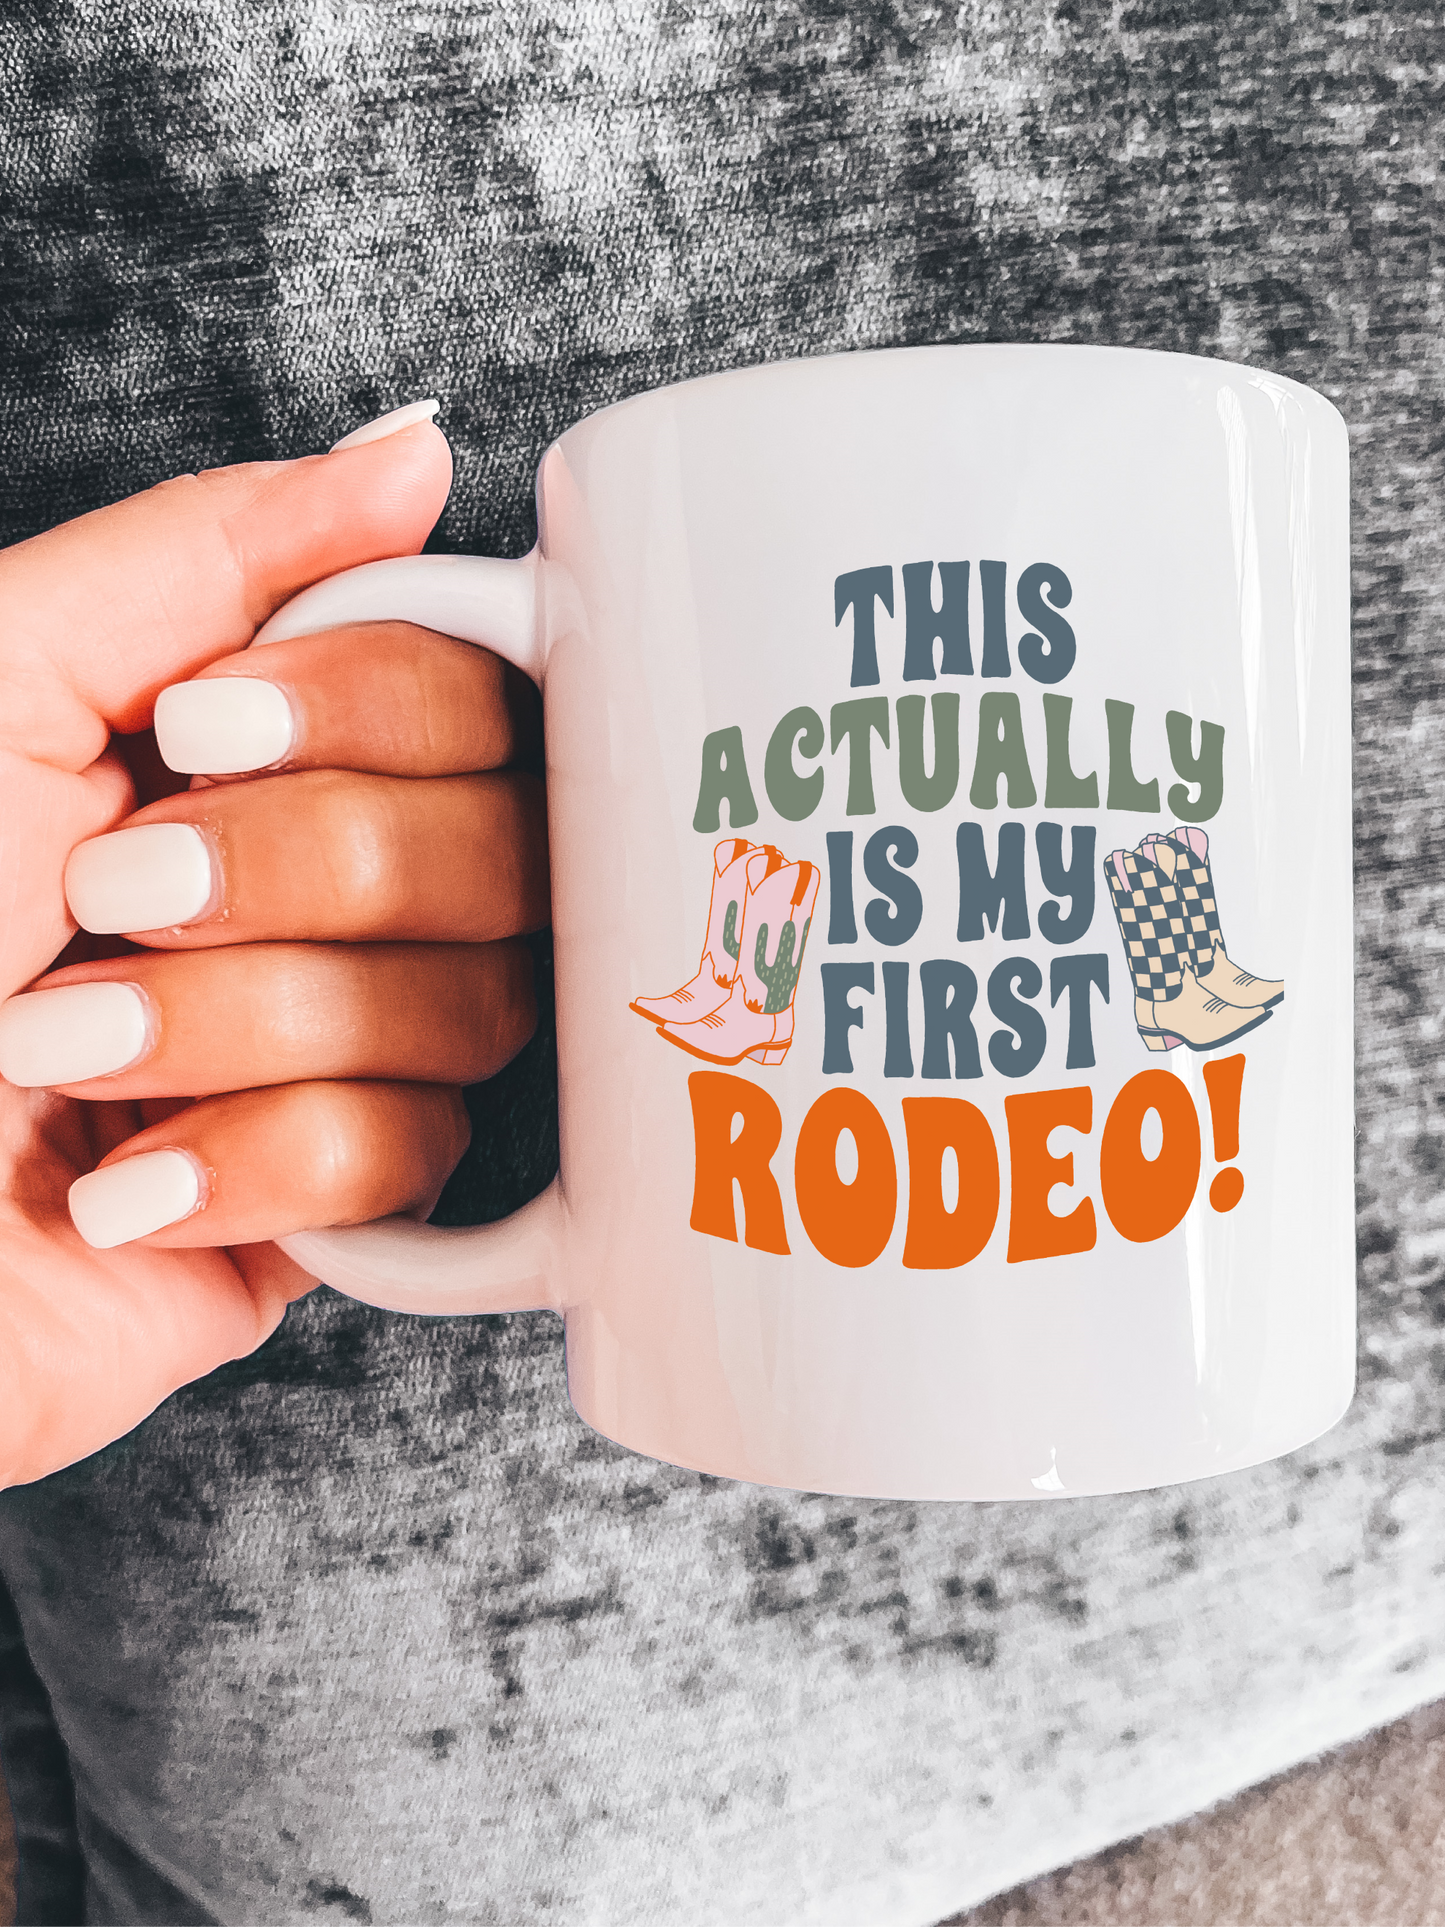 This Actually Is My First Rodeo! Mug